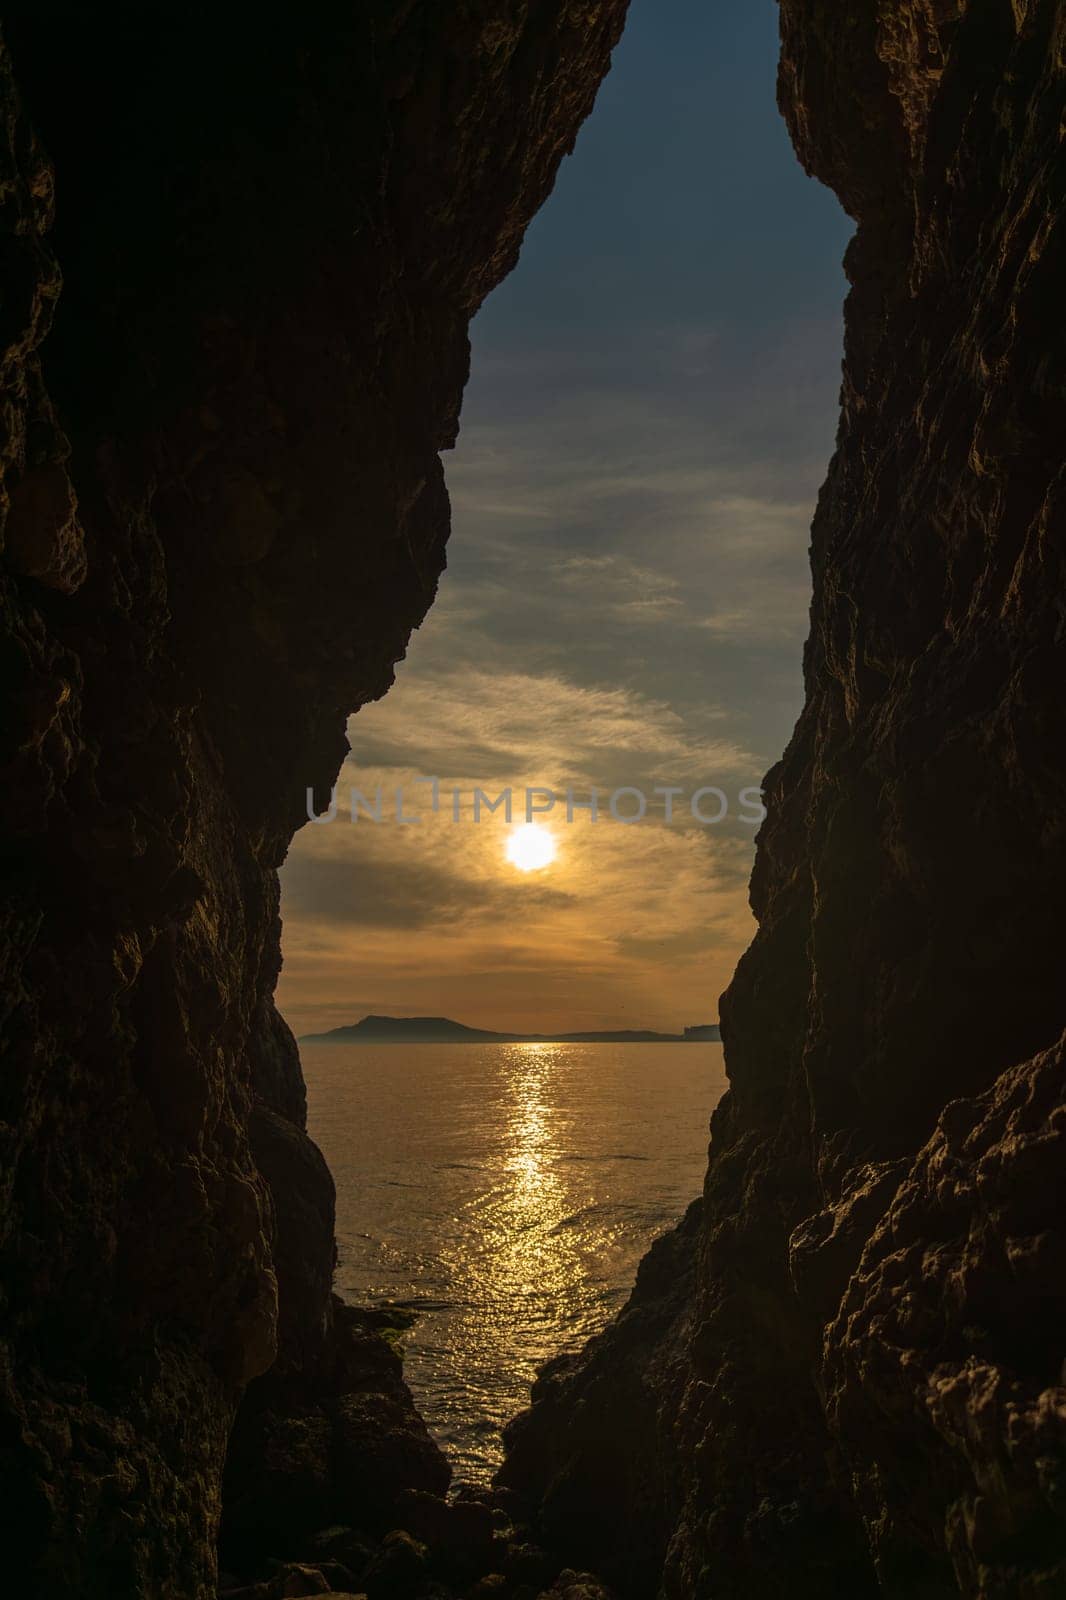 A large rock formation with a small opening in it. The sun is setting and the water is calm